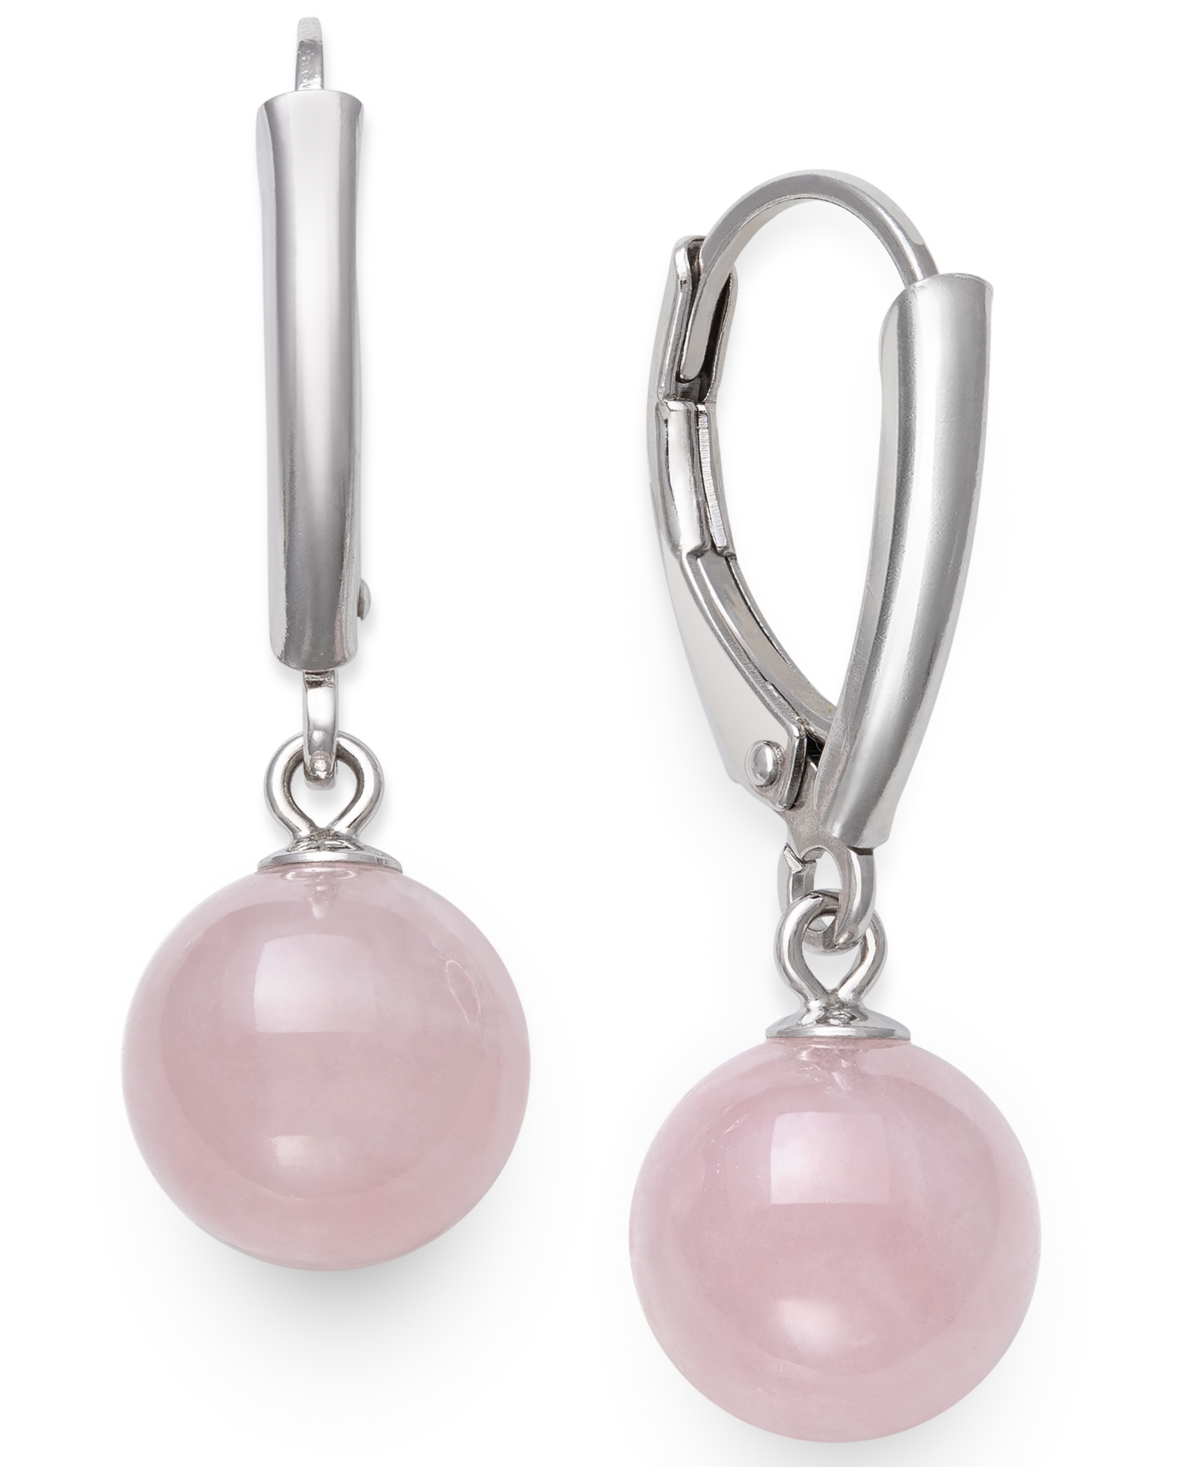 Rose Quartz Drop Earrings in Sterling Silver, Created for Macy's - Sterling Silver